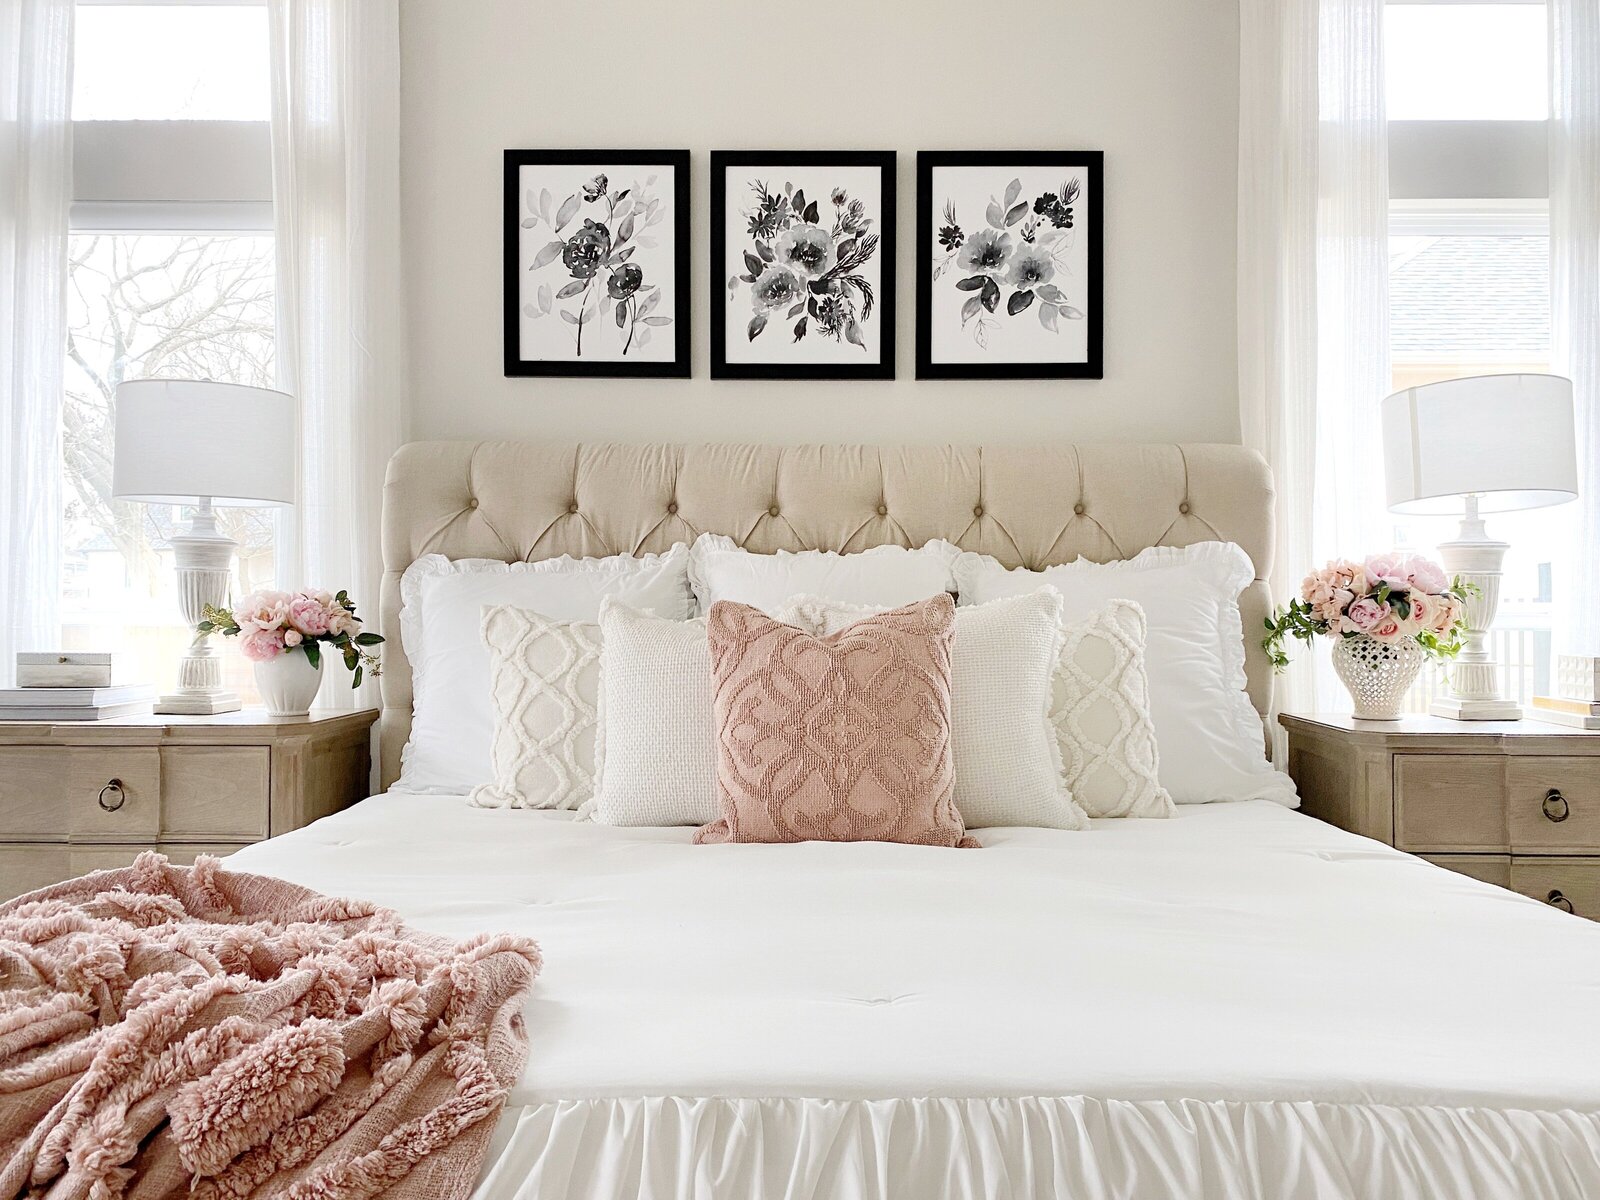 Bedroom space featuring MTH wall art above bed